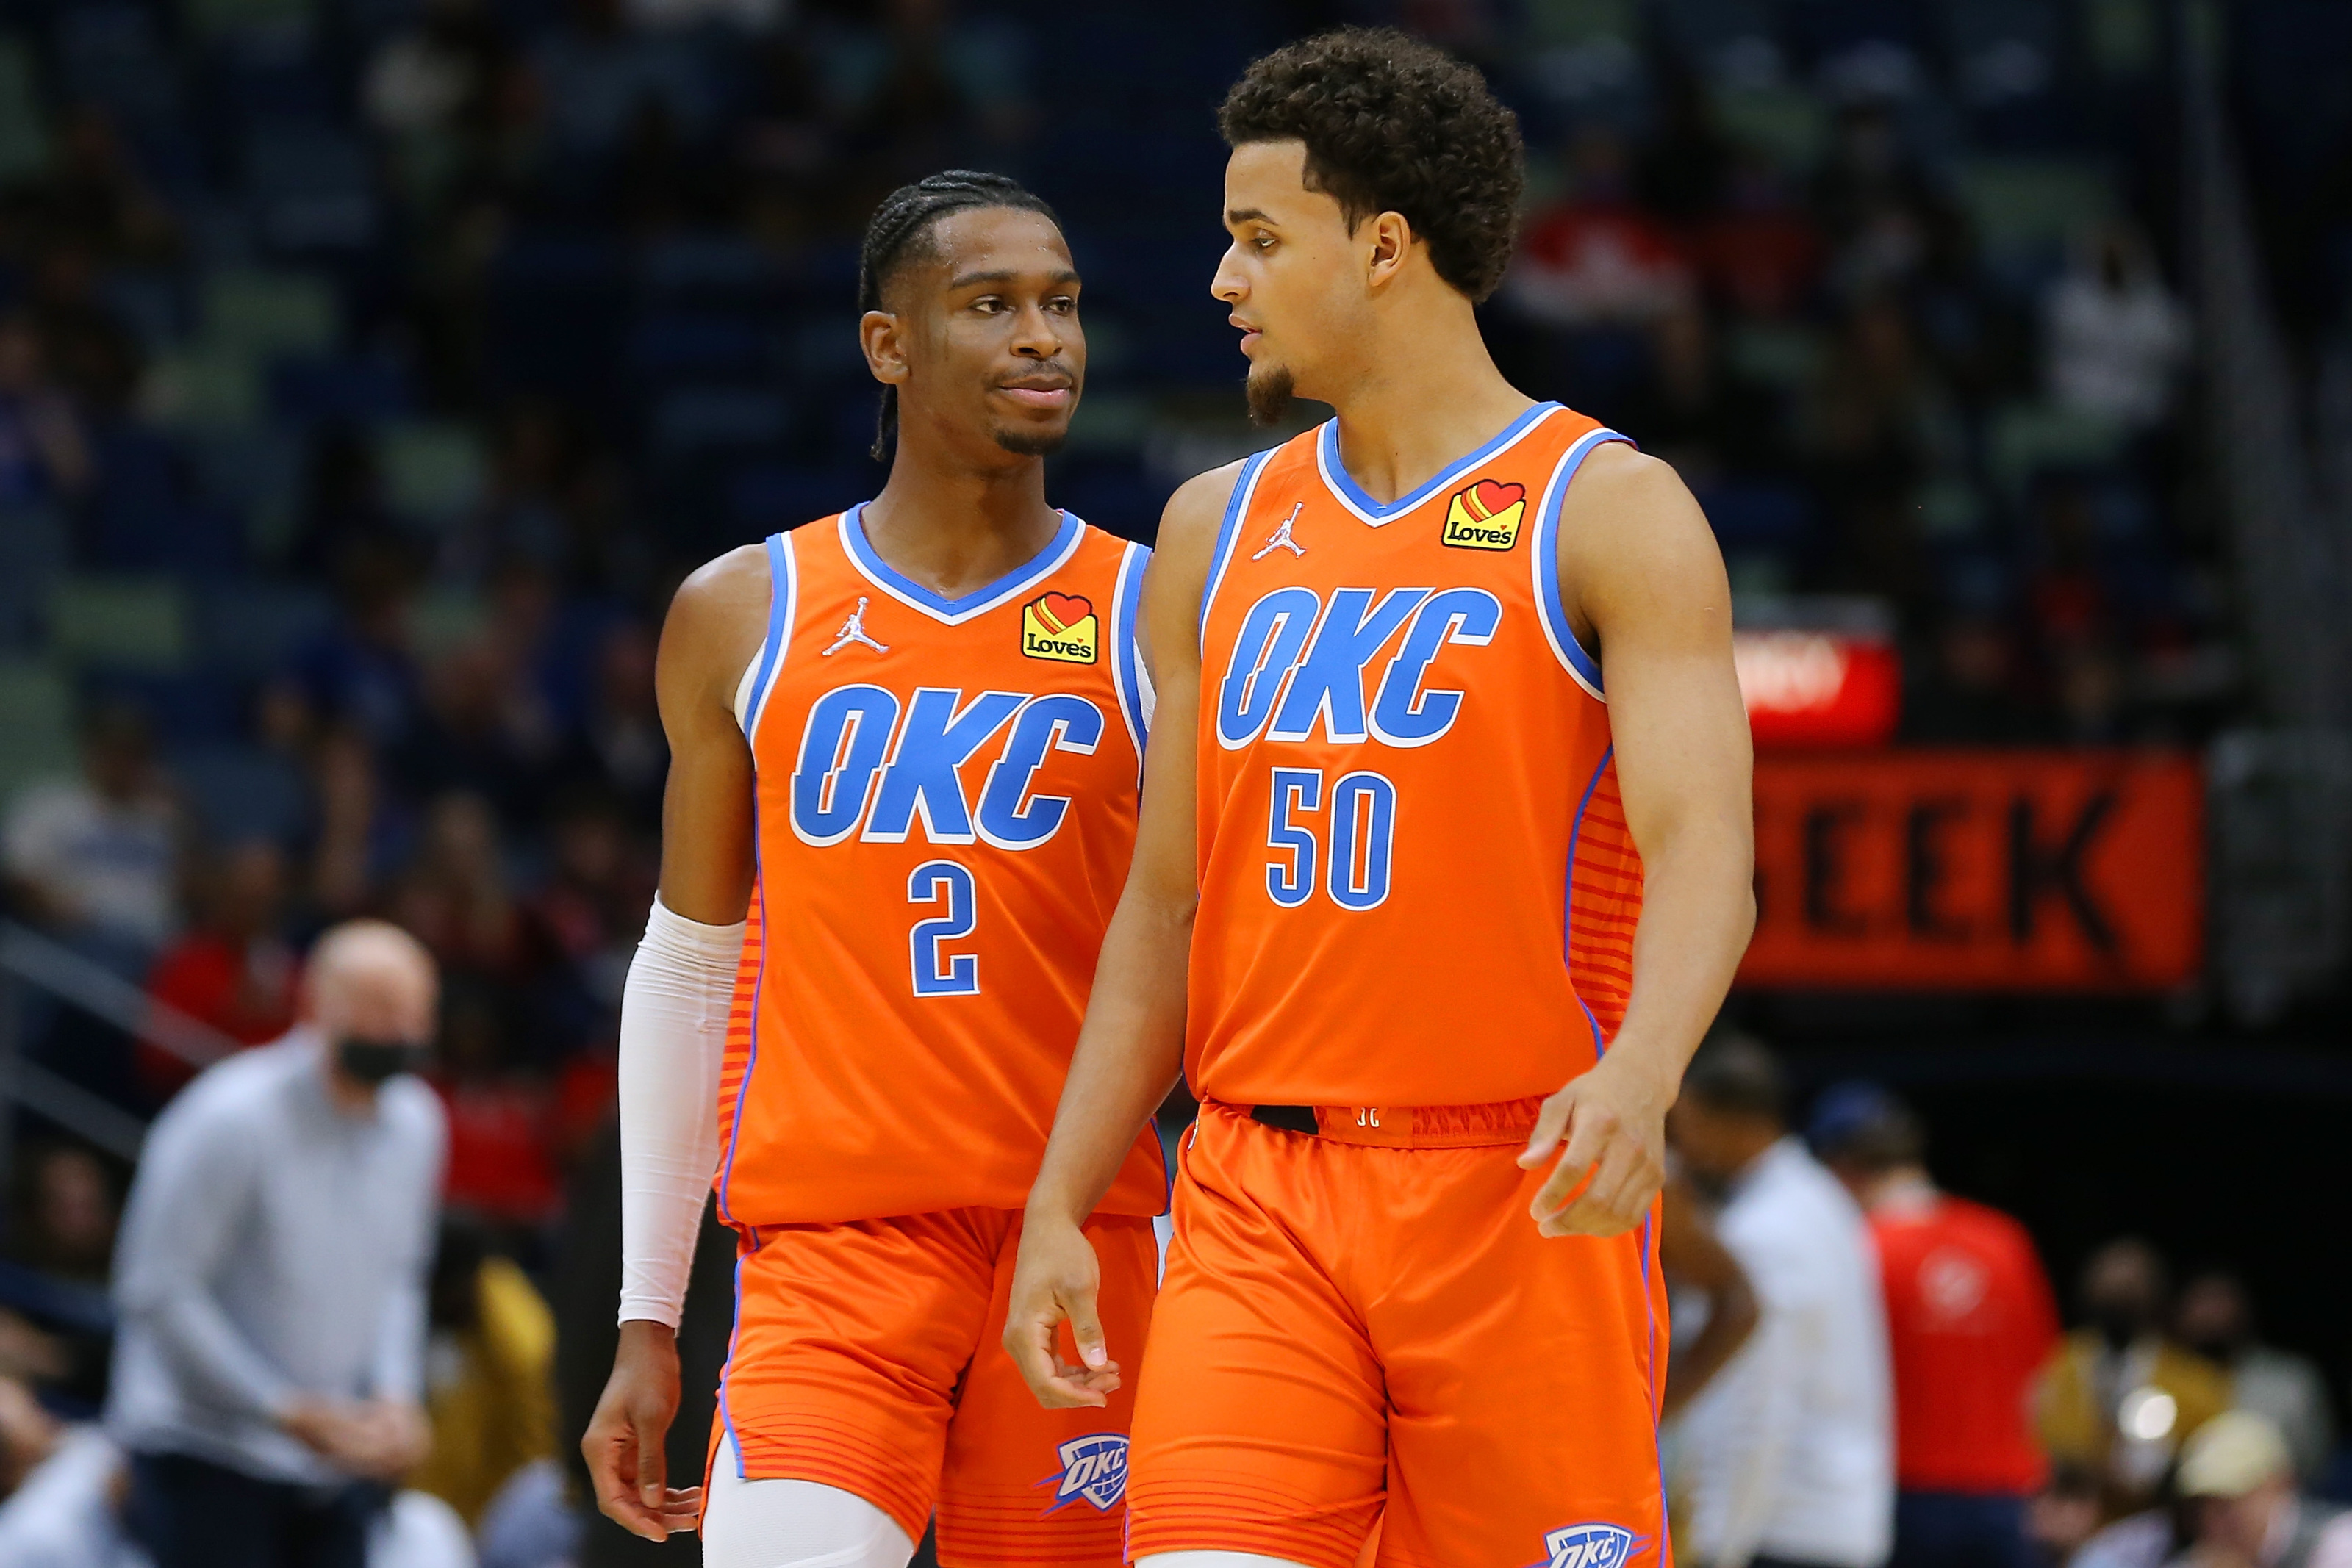 Oklahoma City Thunder 2022-23 schedule has been released